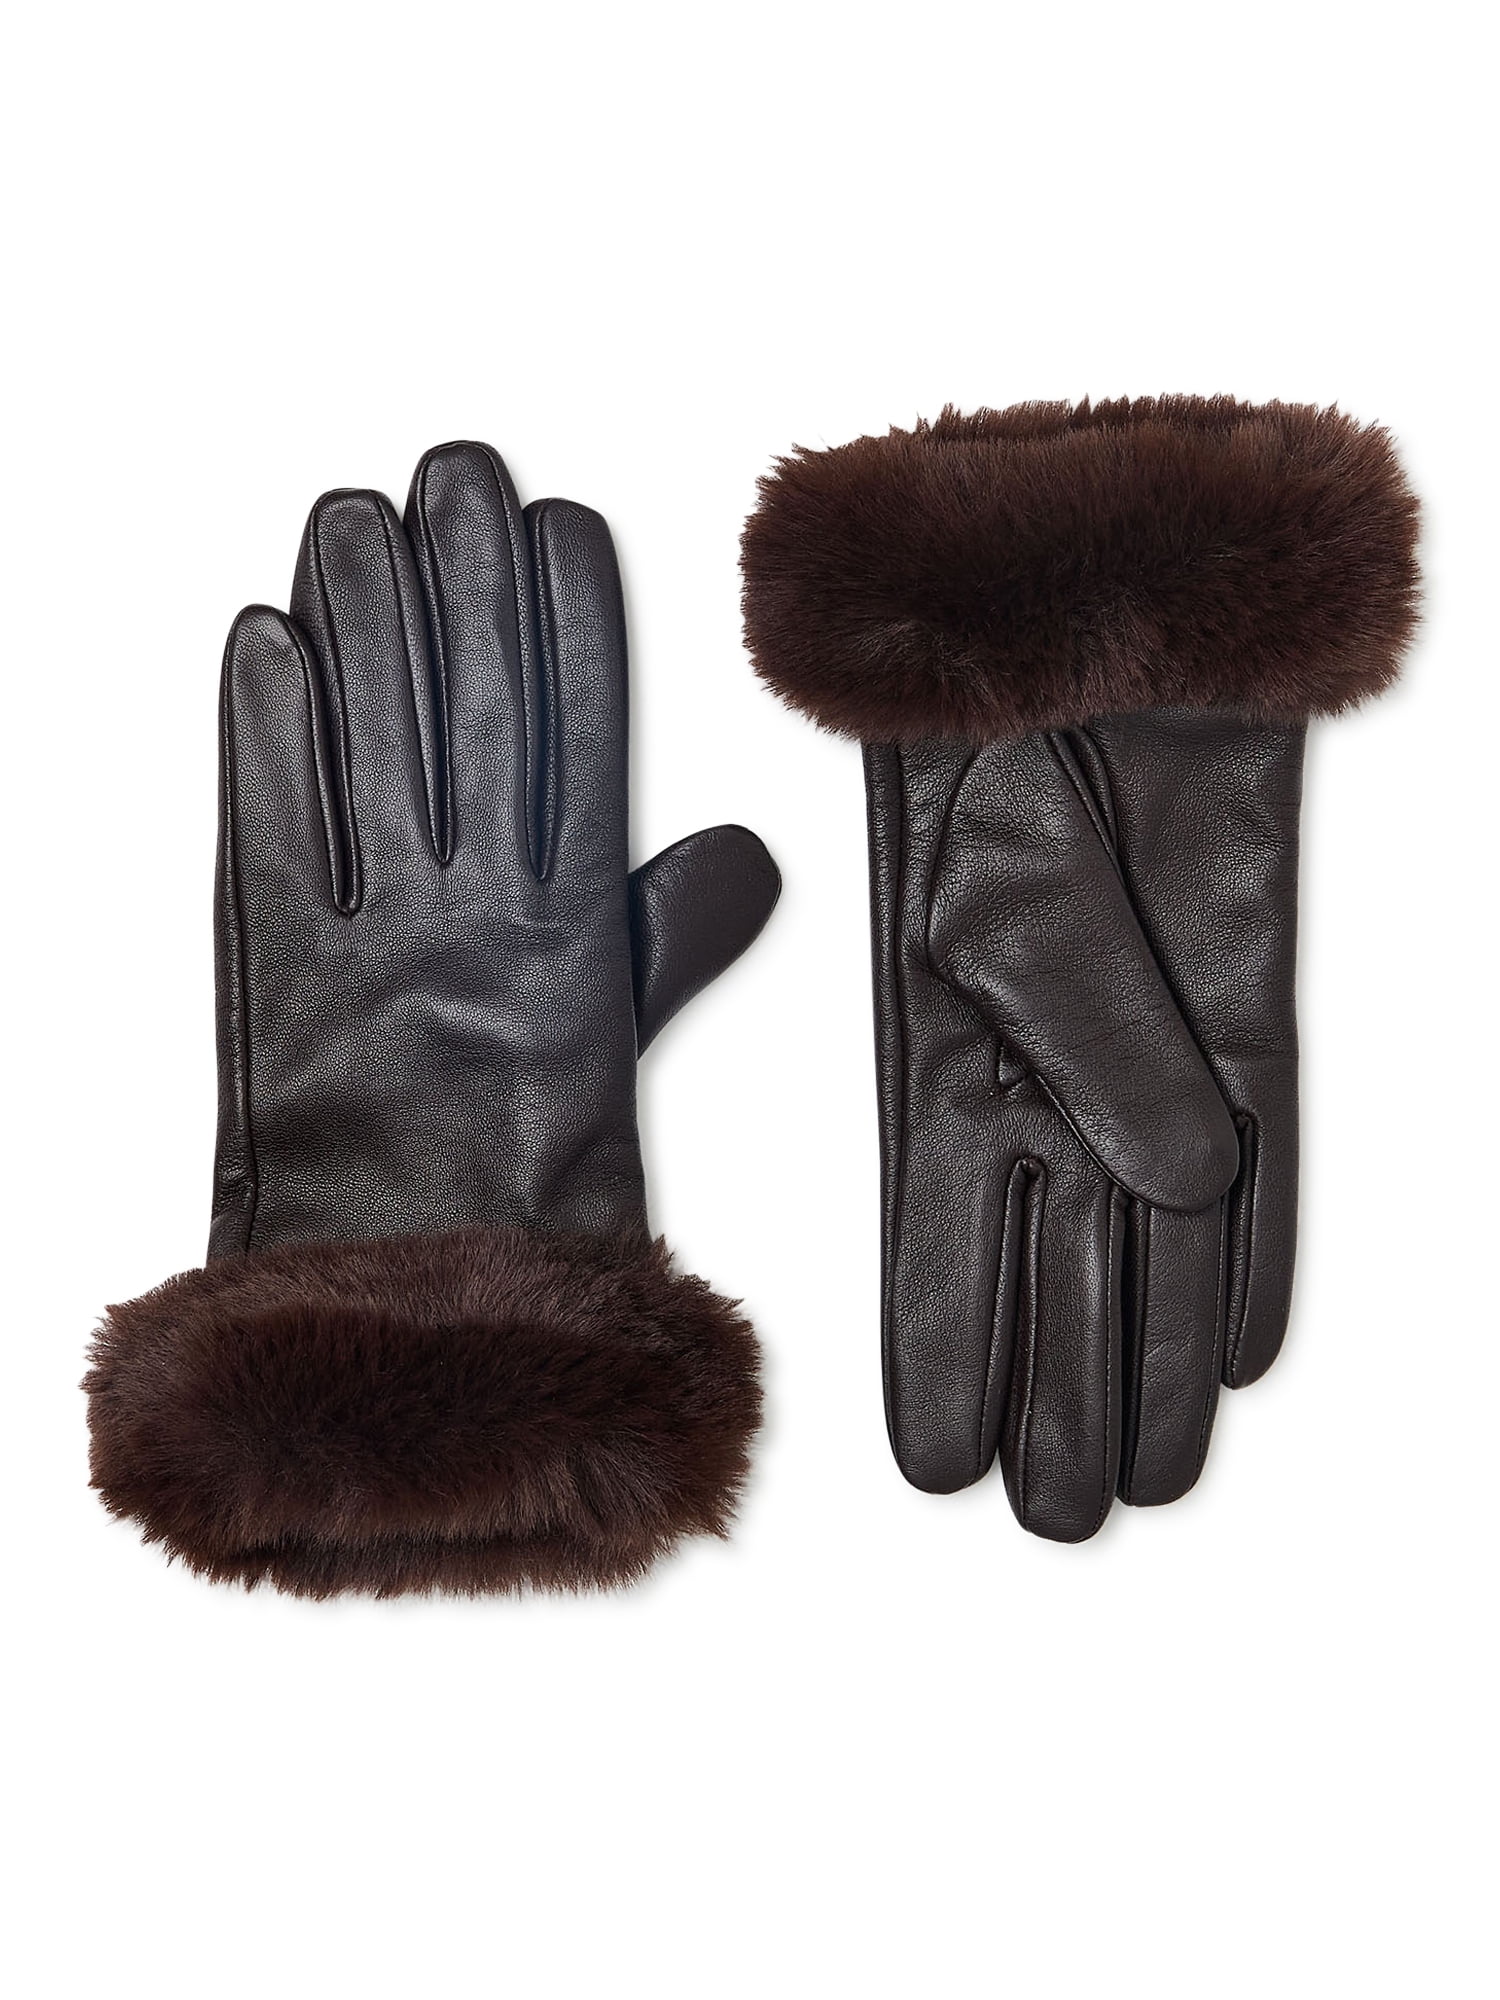 Fashion Women Girls Winter Soft Leather Gloves Fur Warm Driving Party Mittens US